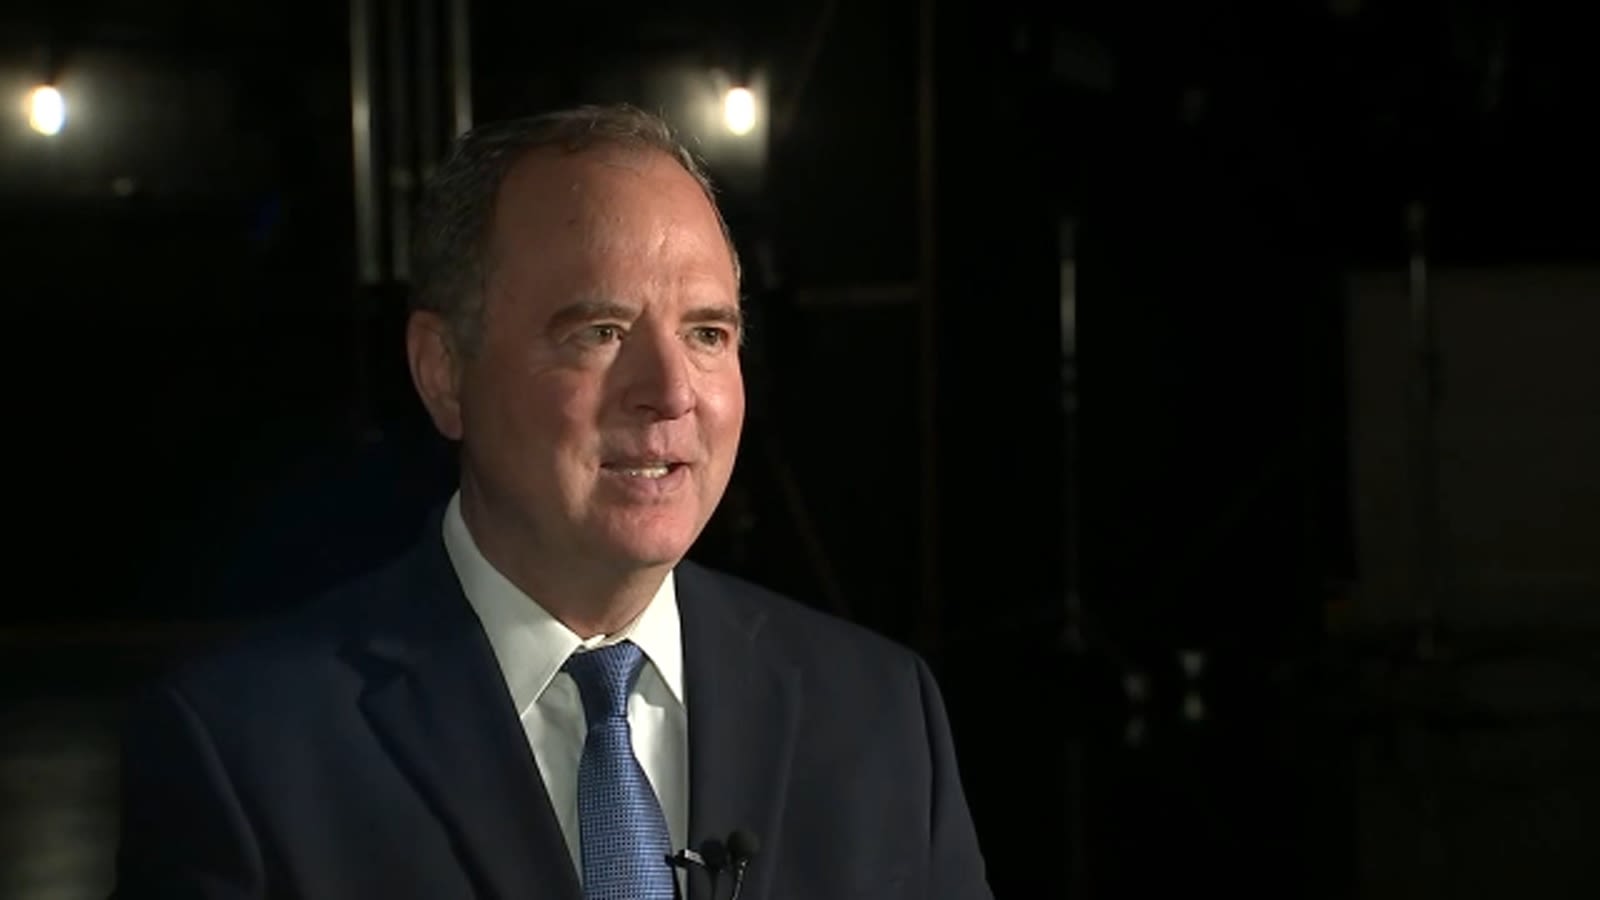 Rep. Adam Schiff, who led first Trump impeachment trial, speaks out after guilty verdict